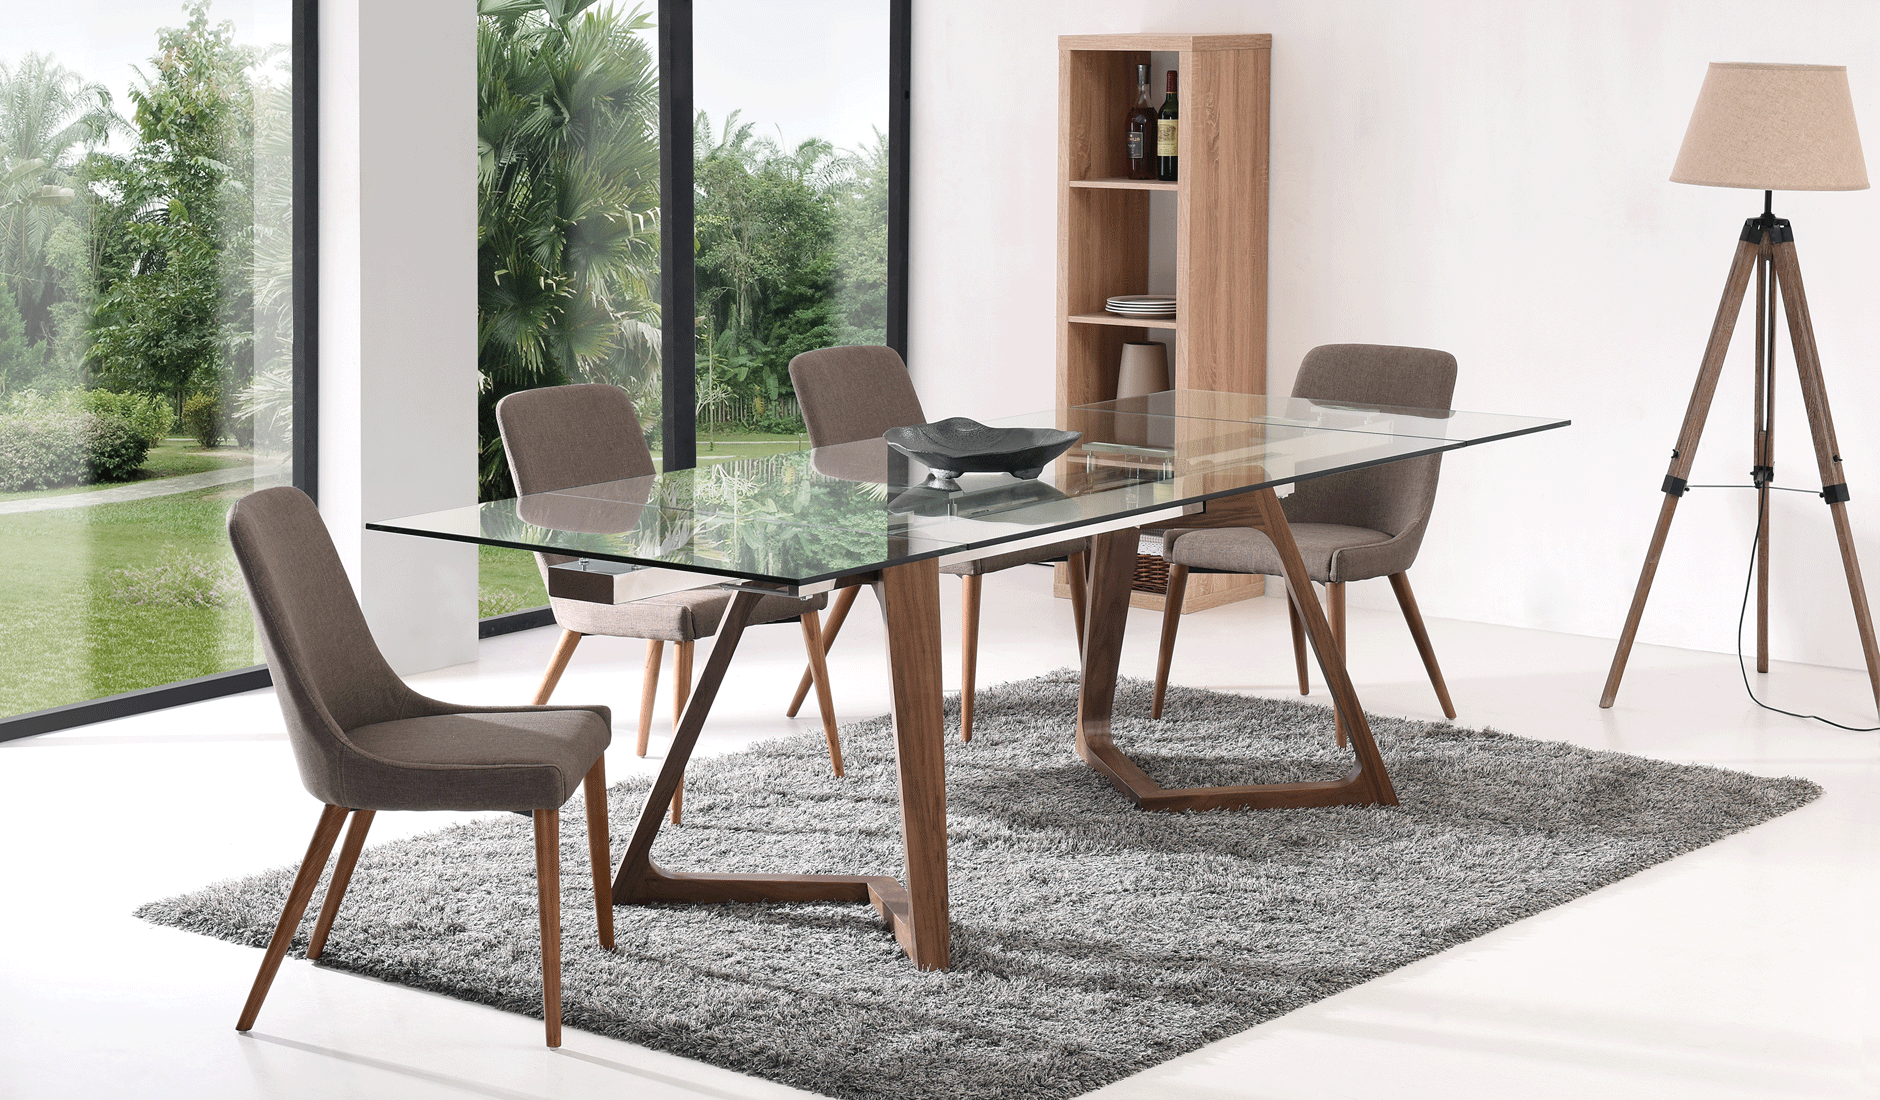 Dining Room Furniture Kitchen Tables and Chairs Sets 8811 Table and 941 Chairs